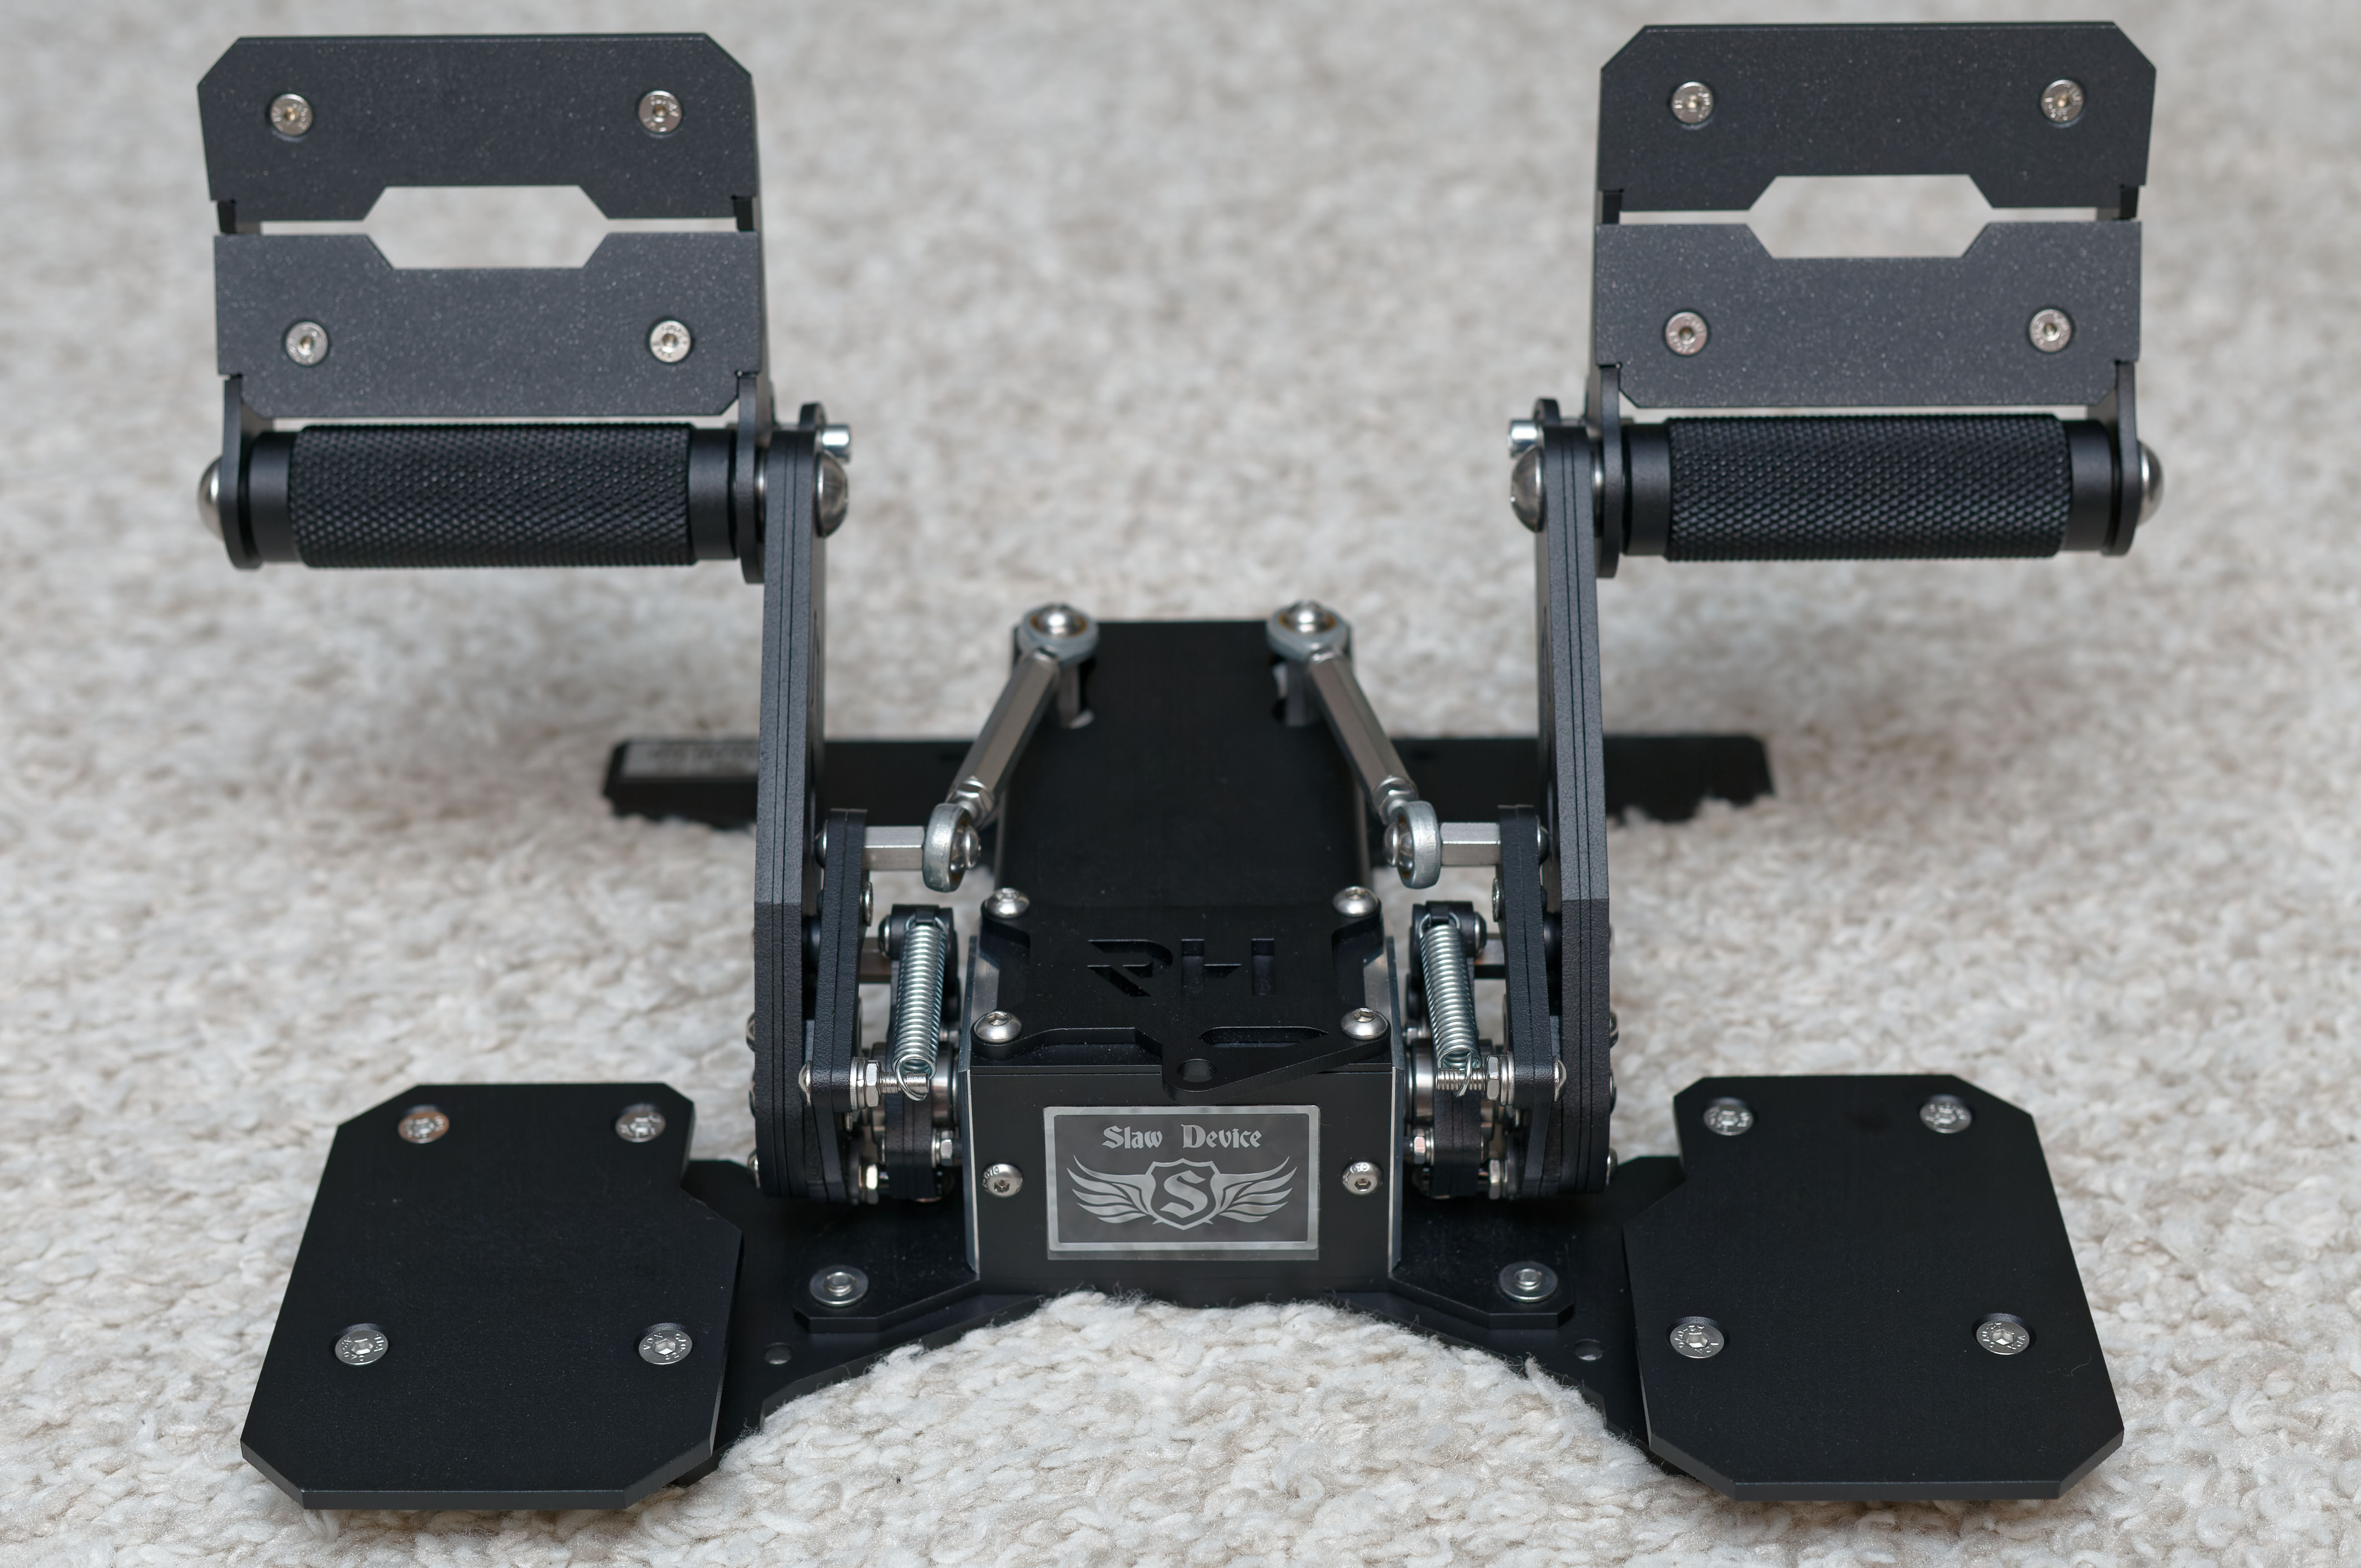 Slaw Device is back: RH Rotor Pedals rule the skies—for $475